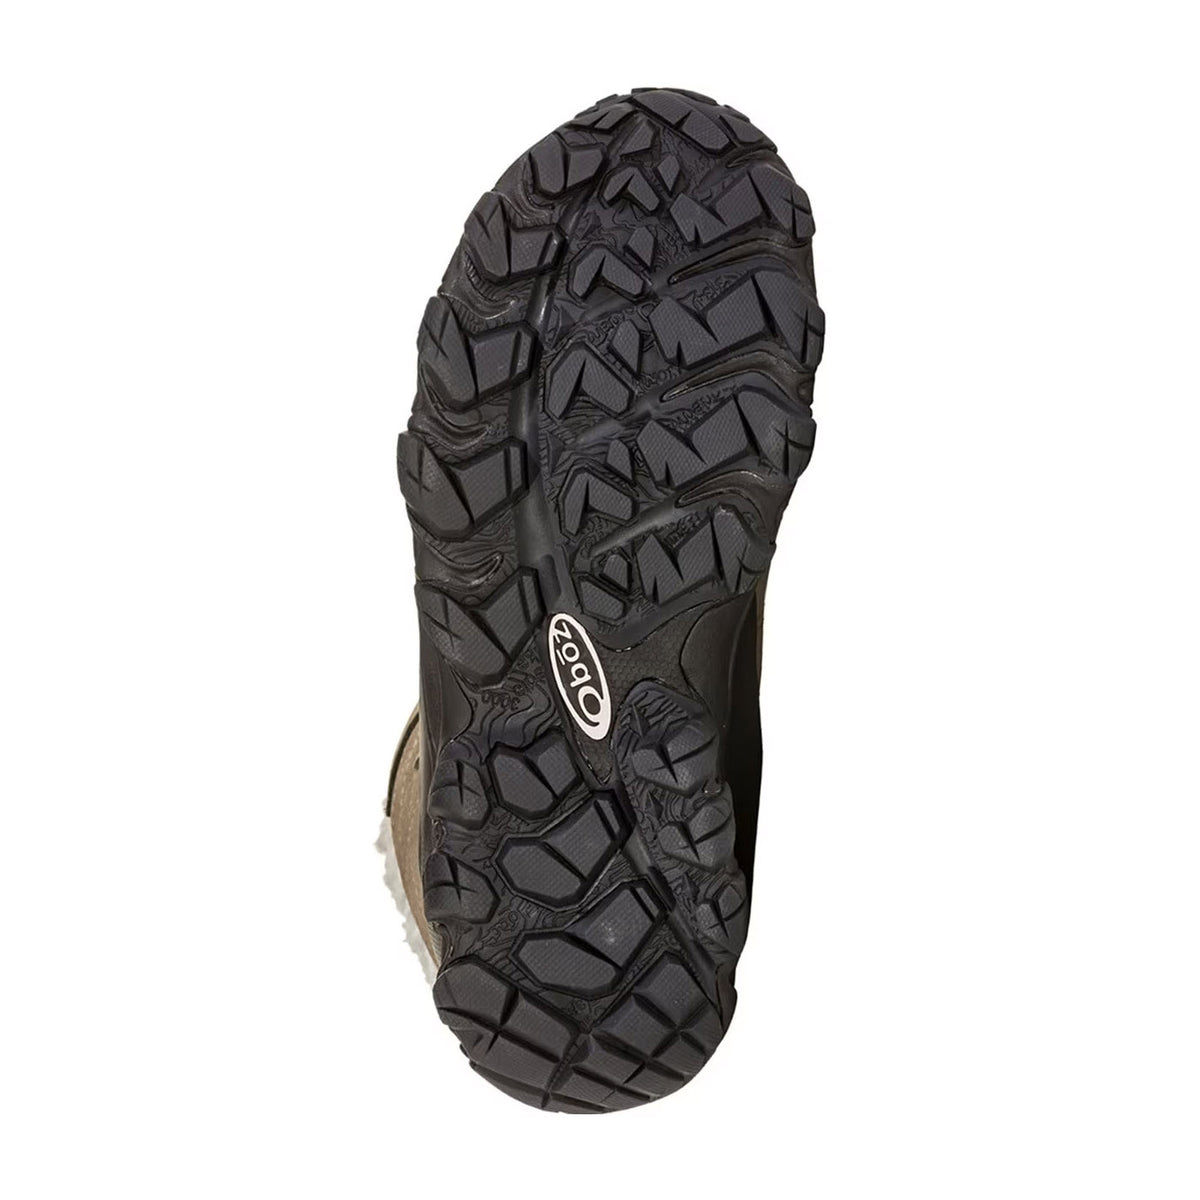 OBOZ BRIDGER 9&#39; INSULATED BDRY BRINDLE - WOMENS